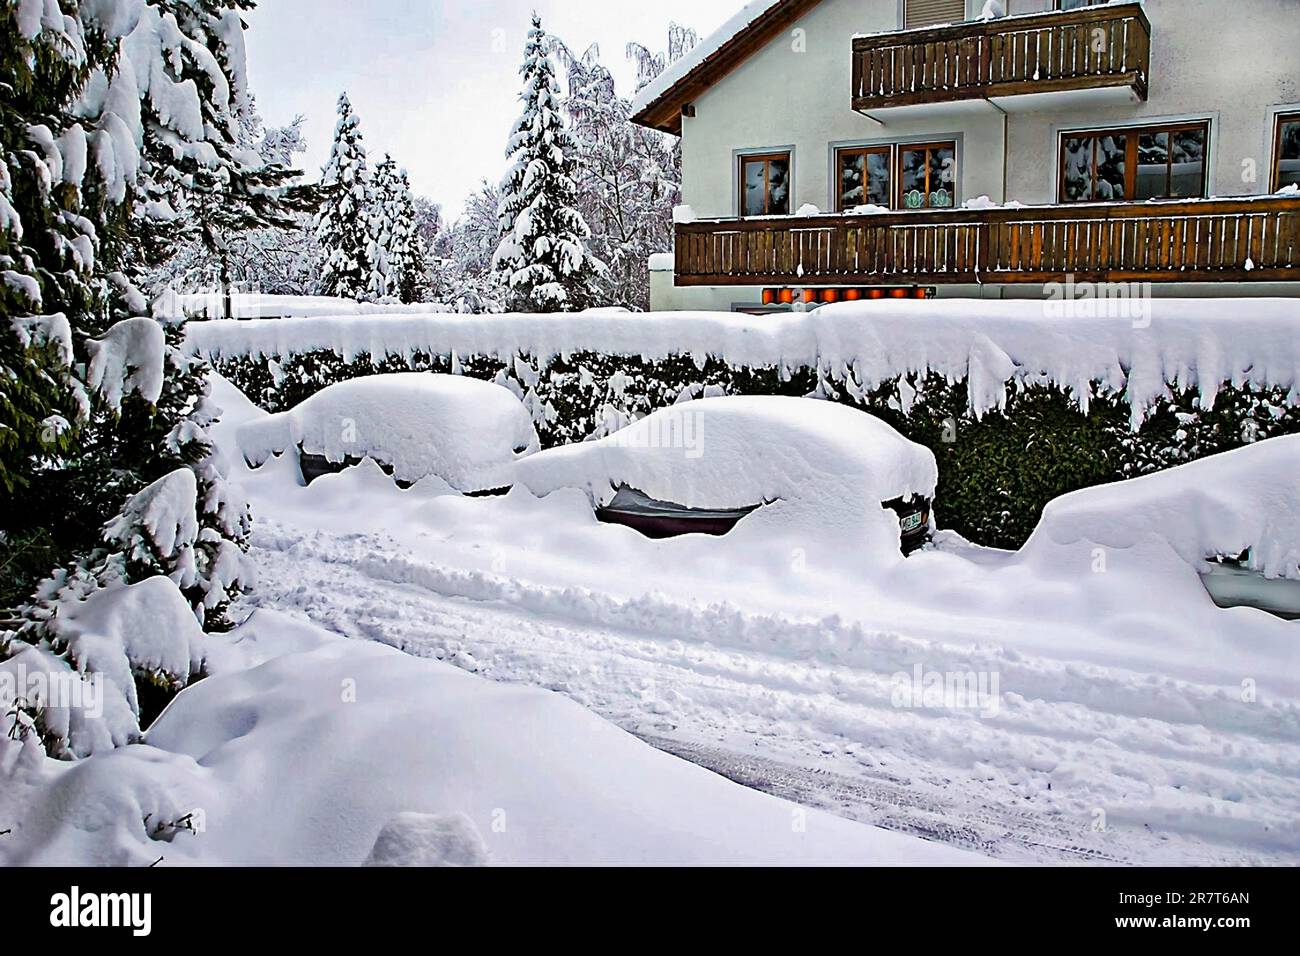 Cars, house and trees, completely snowed in, street full of snow, winter weather, heavy snowfall, Bavaria Stock Photo